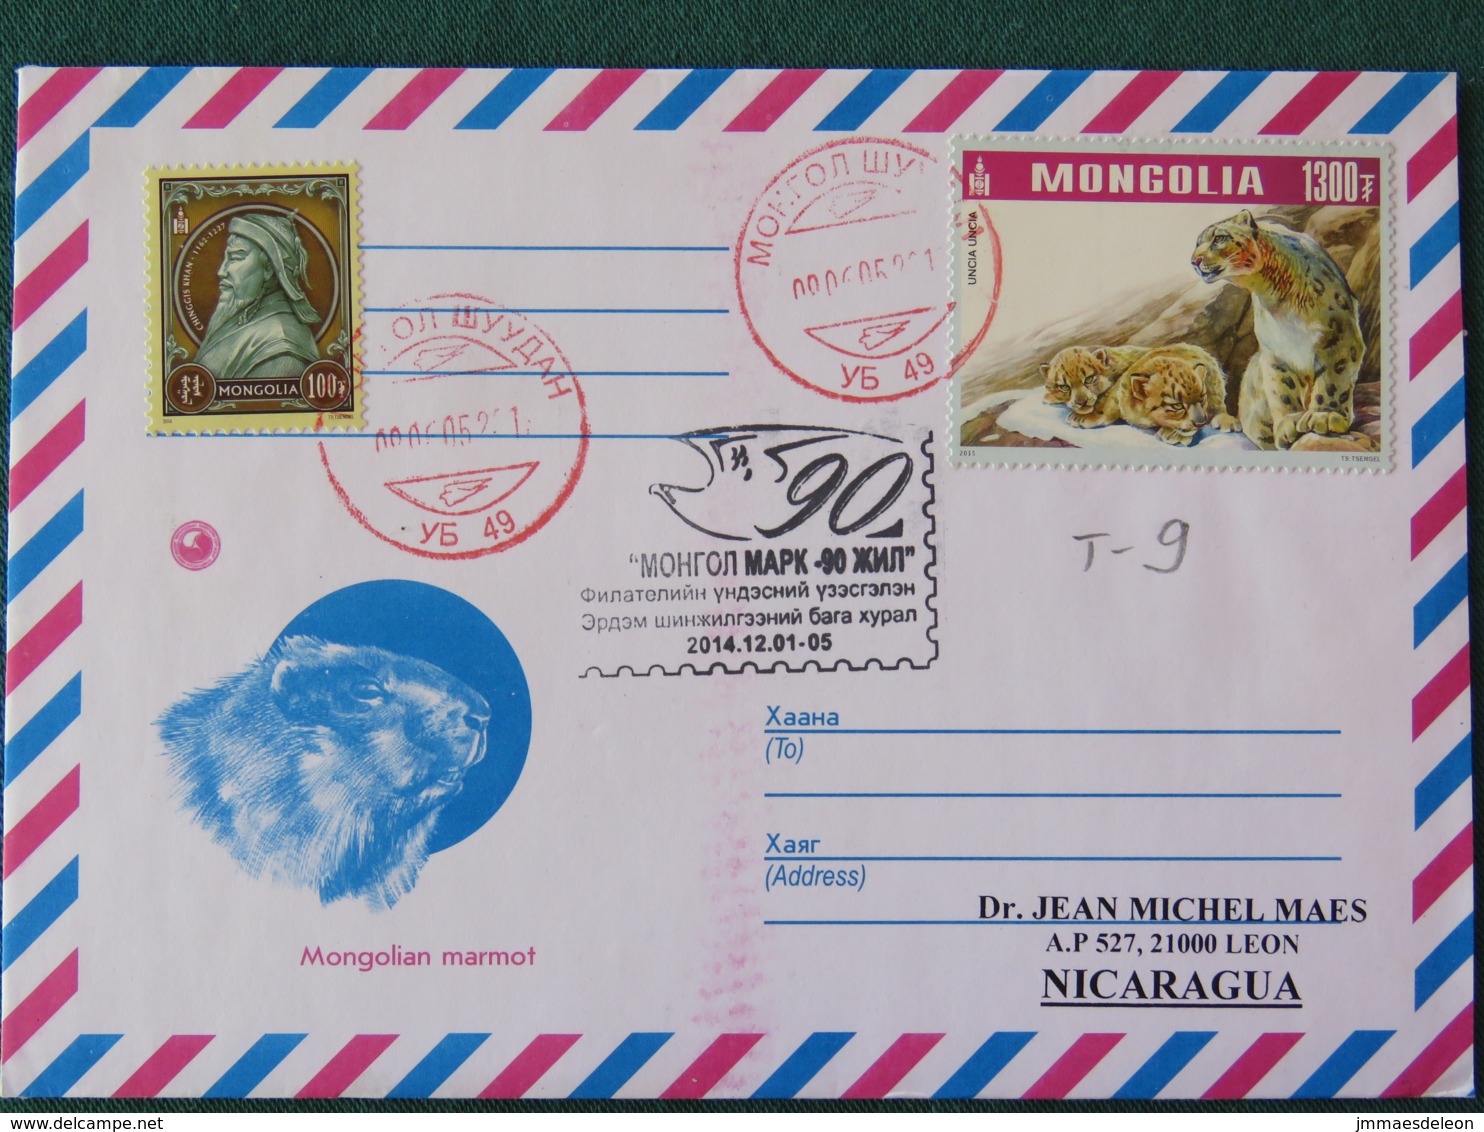 Mongolia 2017 Cover To Nicaragua - Wild Cat - Mongolie